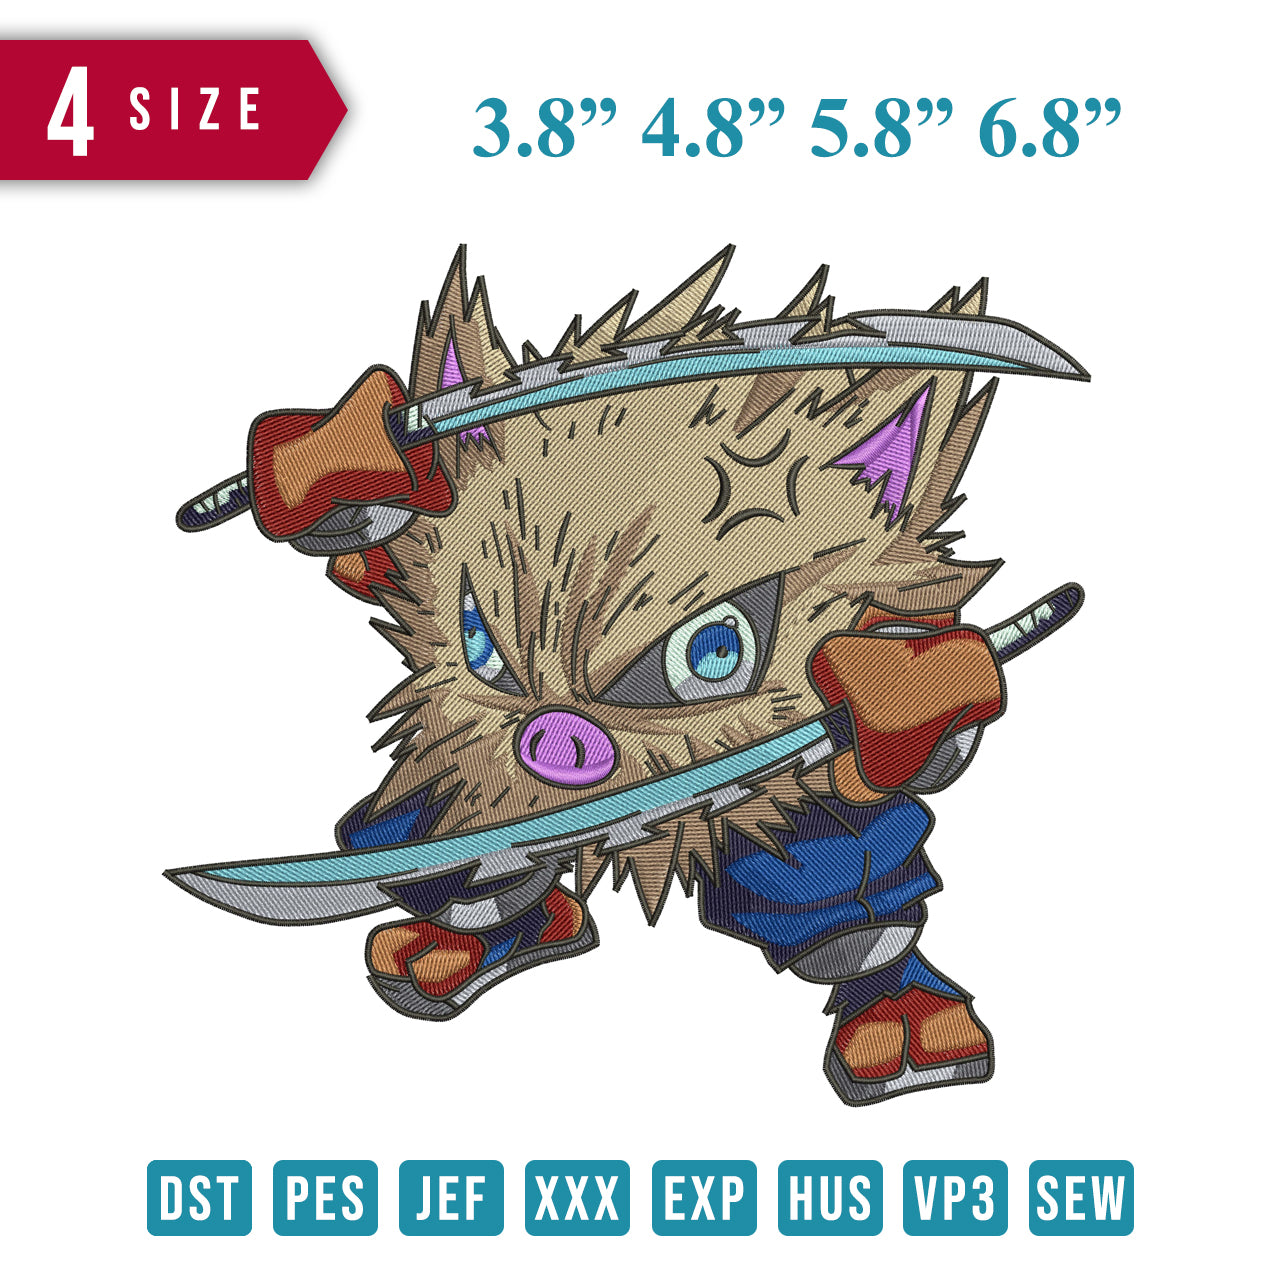 Primeape with sword